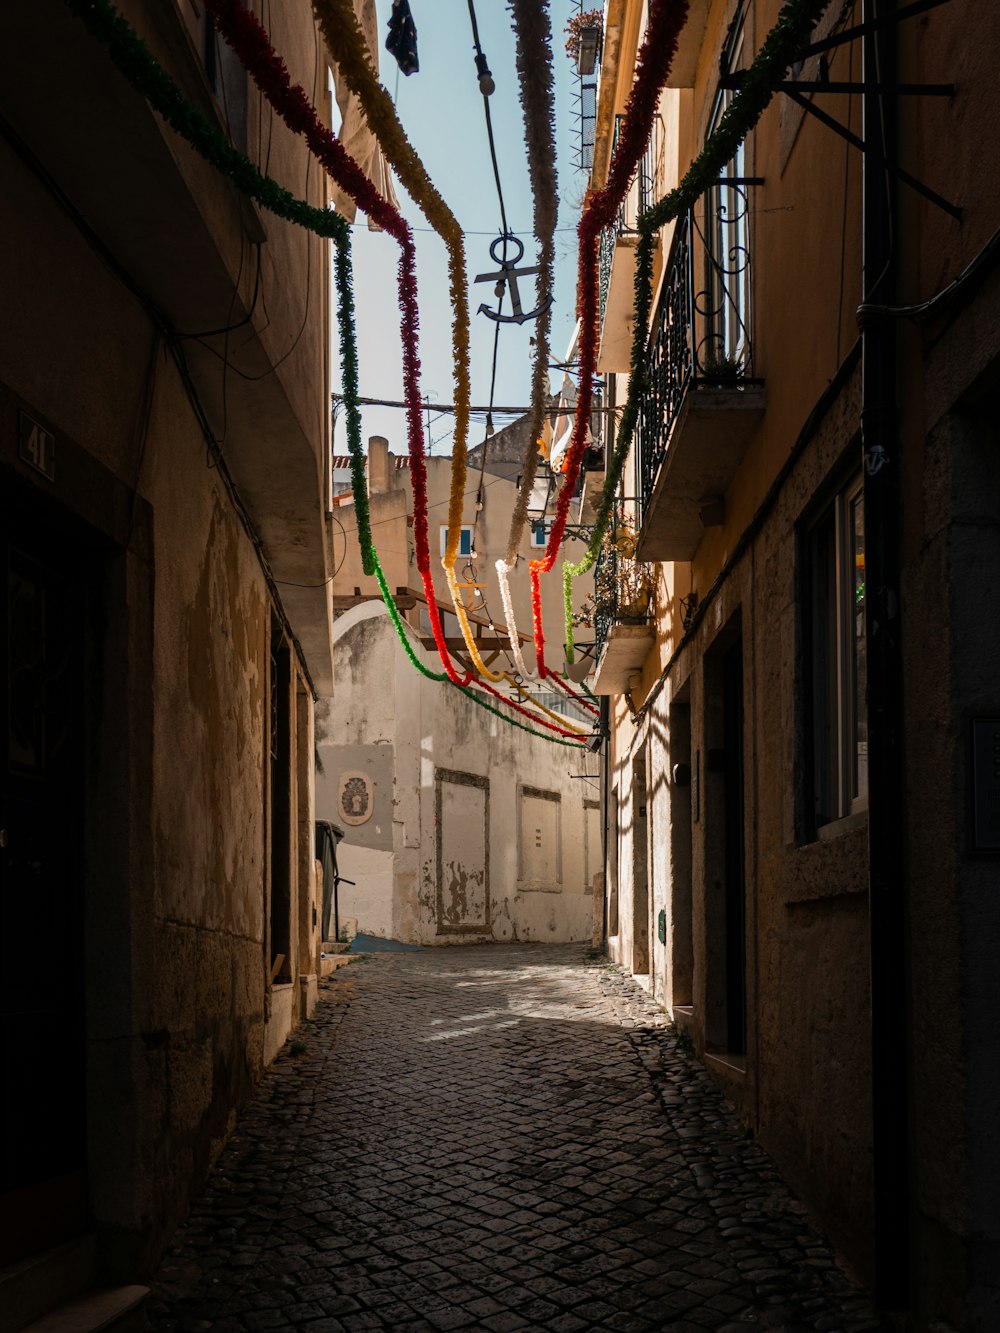 a narrow alleyway with decorations hanging from the ceiling